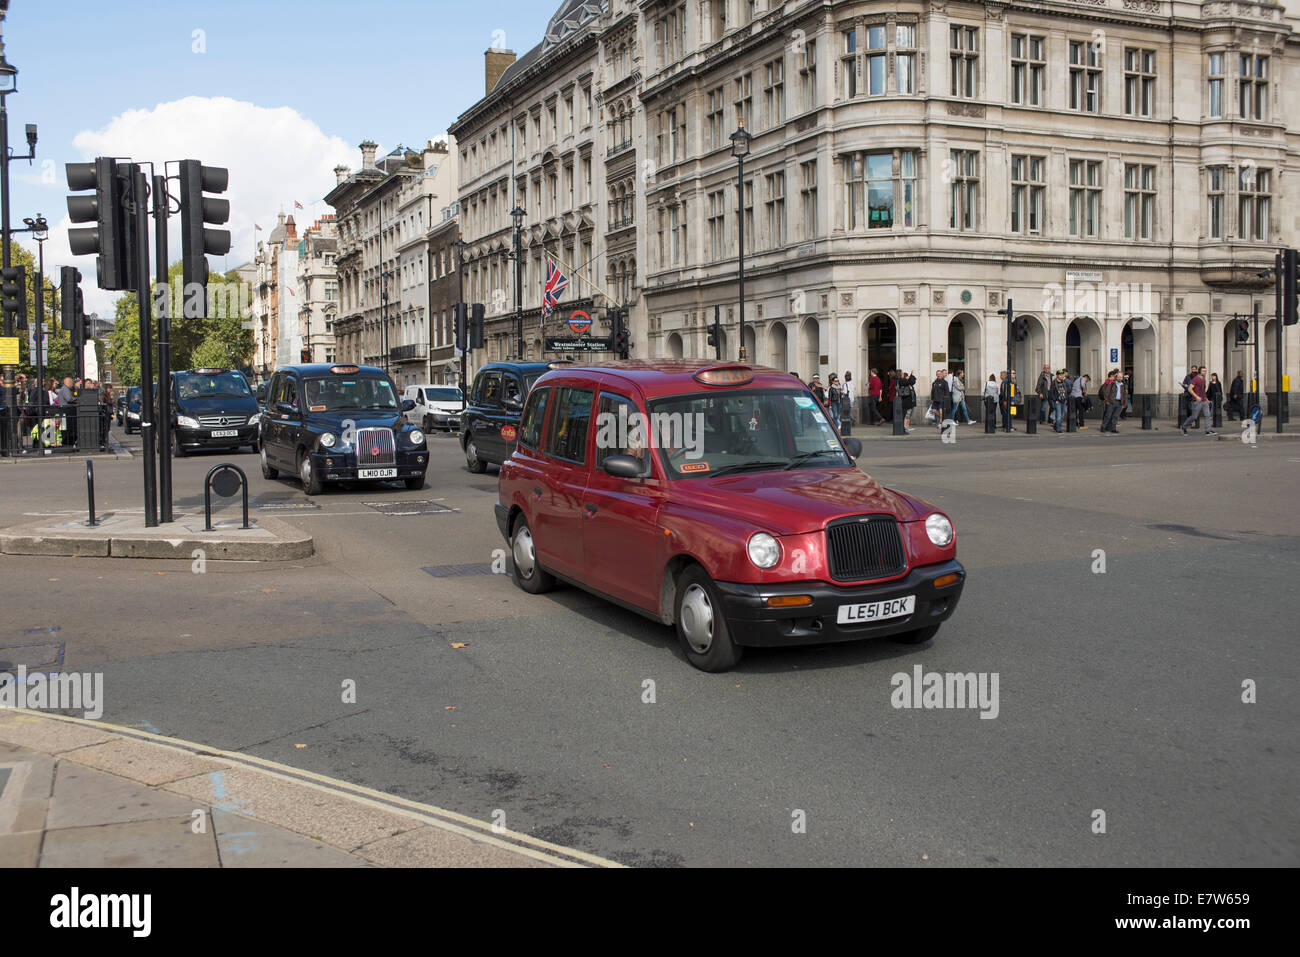 Central London, UK. 24th September 2014. Black cab taxi drivers protest TfL’s taxi policies today by driving in central London at a snails pace around 2pm. Areas affected are around Parliament Square, Whitehall and Trafalgar Square. Taxis start to arrive before 2pm. Credit:  Malcolm Park editorial/Alamy Live News. Stock Photo